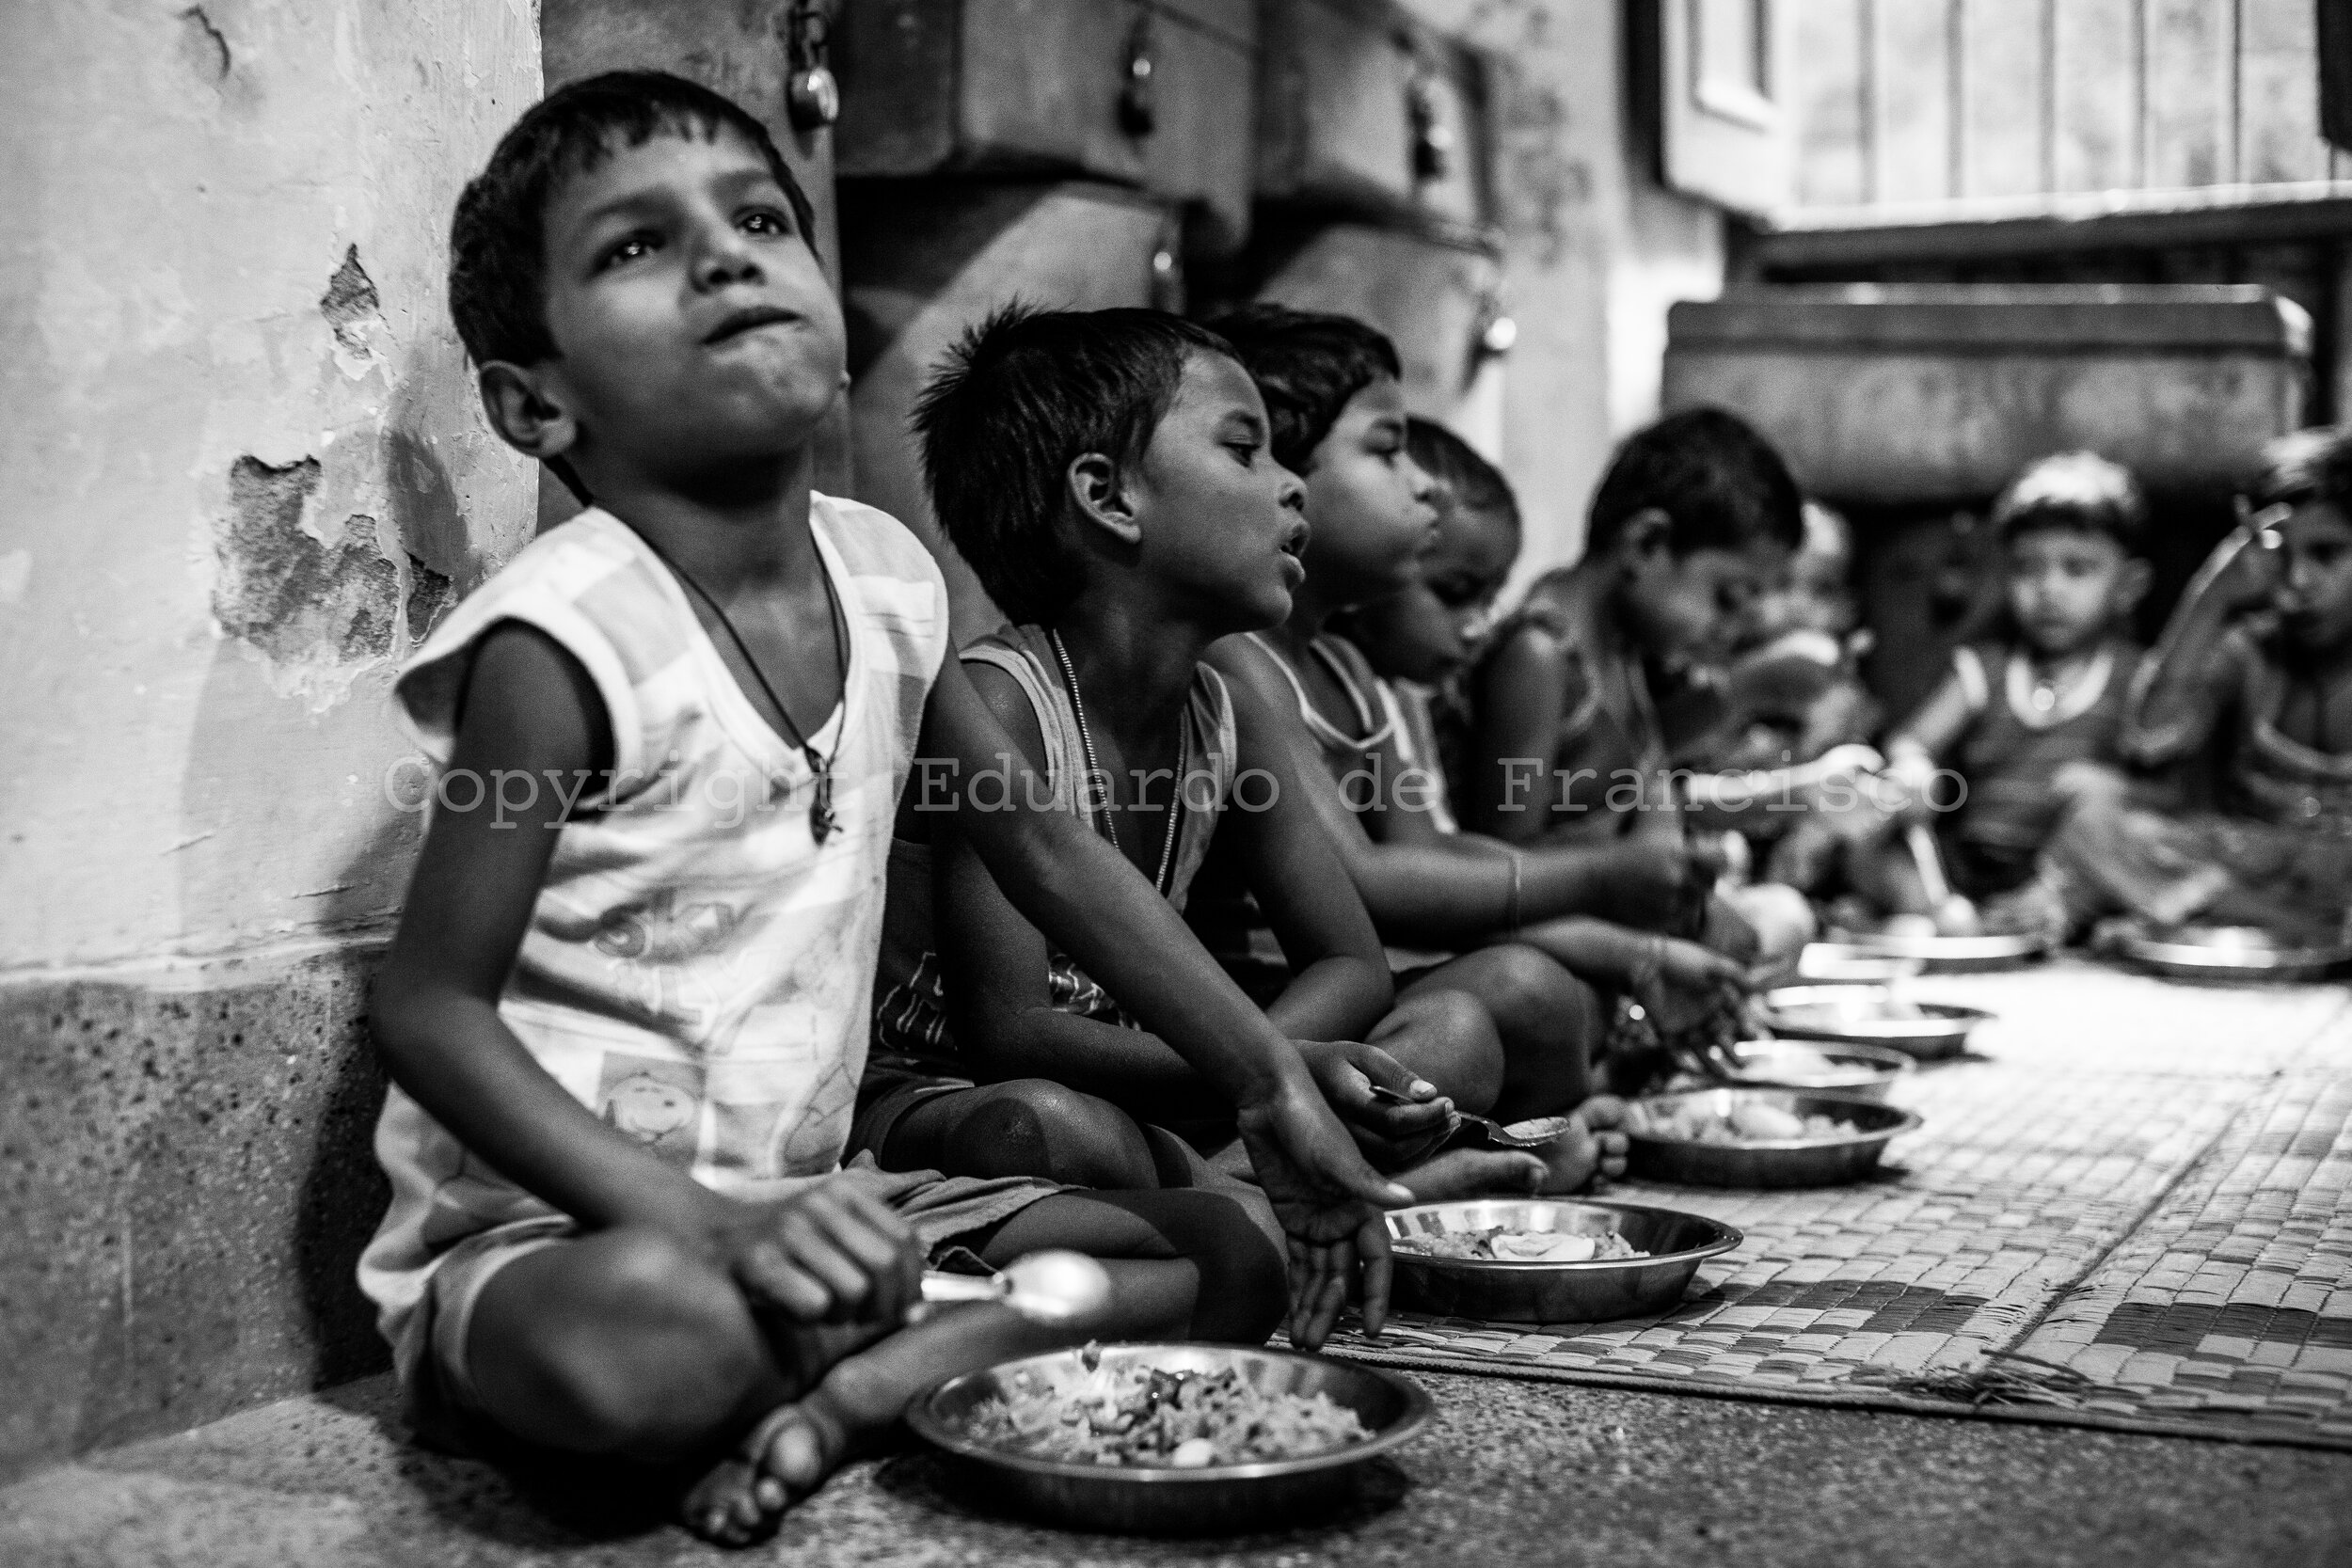  In Kalighat, a group of children, sons and daughters from women working on prostitution in the area, receive a daily meal at school. Since the introduction of the program, the rates of infant malnutrition have been reduced considerably. 